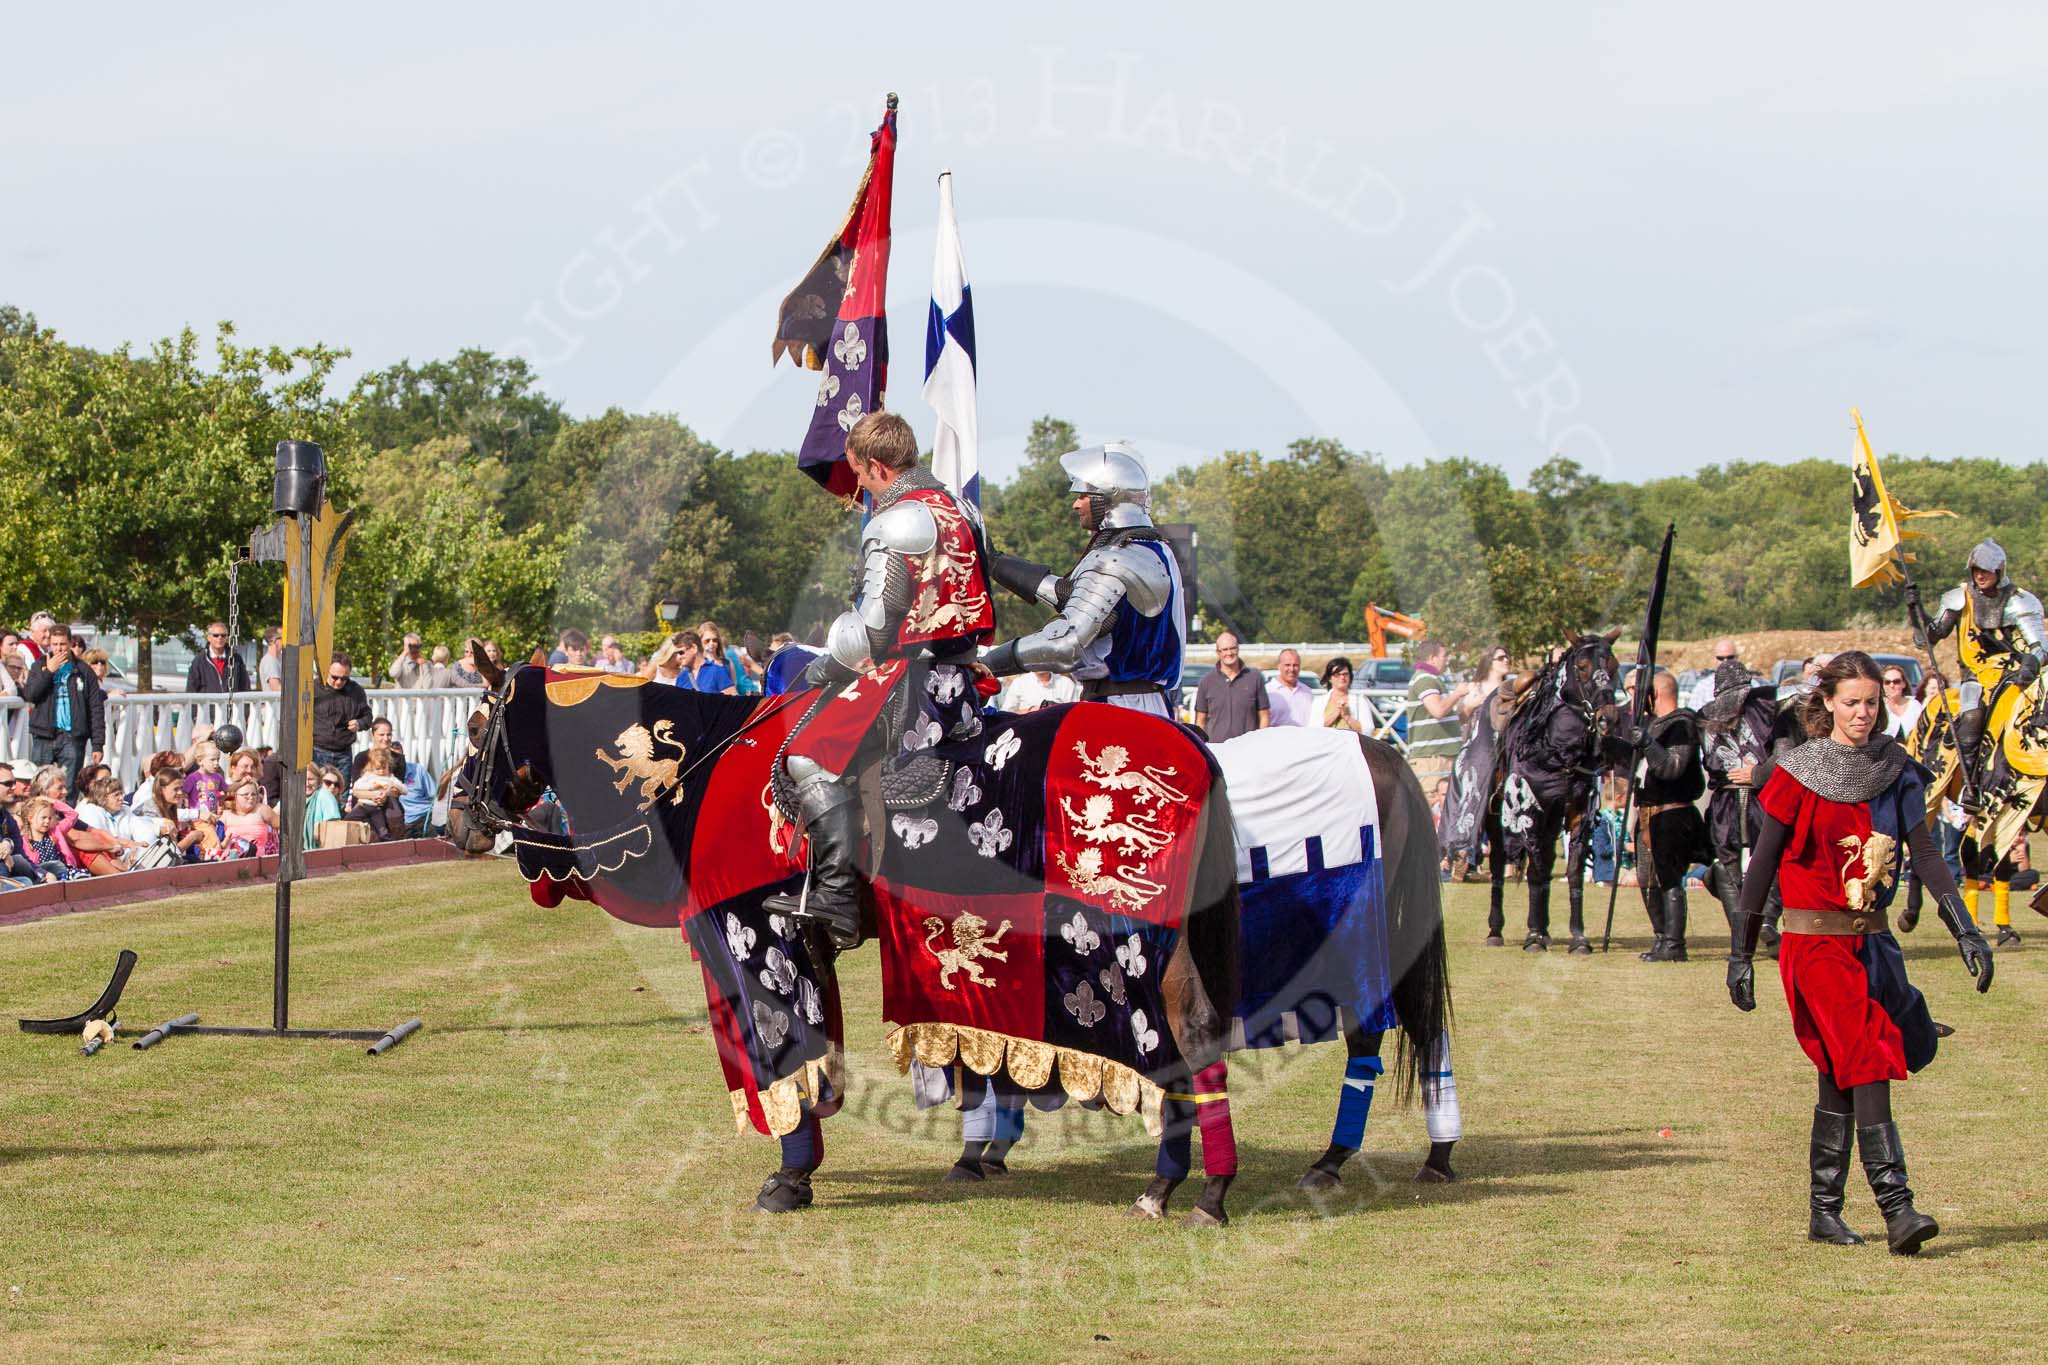 DBPC Polo in the Park 2013 - jousting display by the Knights of Middle England.
Dallas Burston Polo Club, ,
Southam,
Warwickshire,
United Kingdom,
on 01 September 2013 at 15:49, image #551